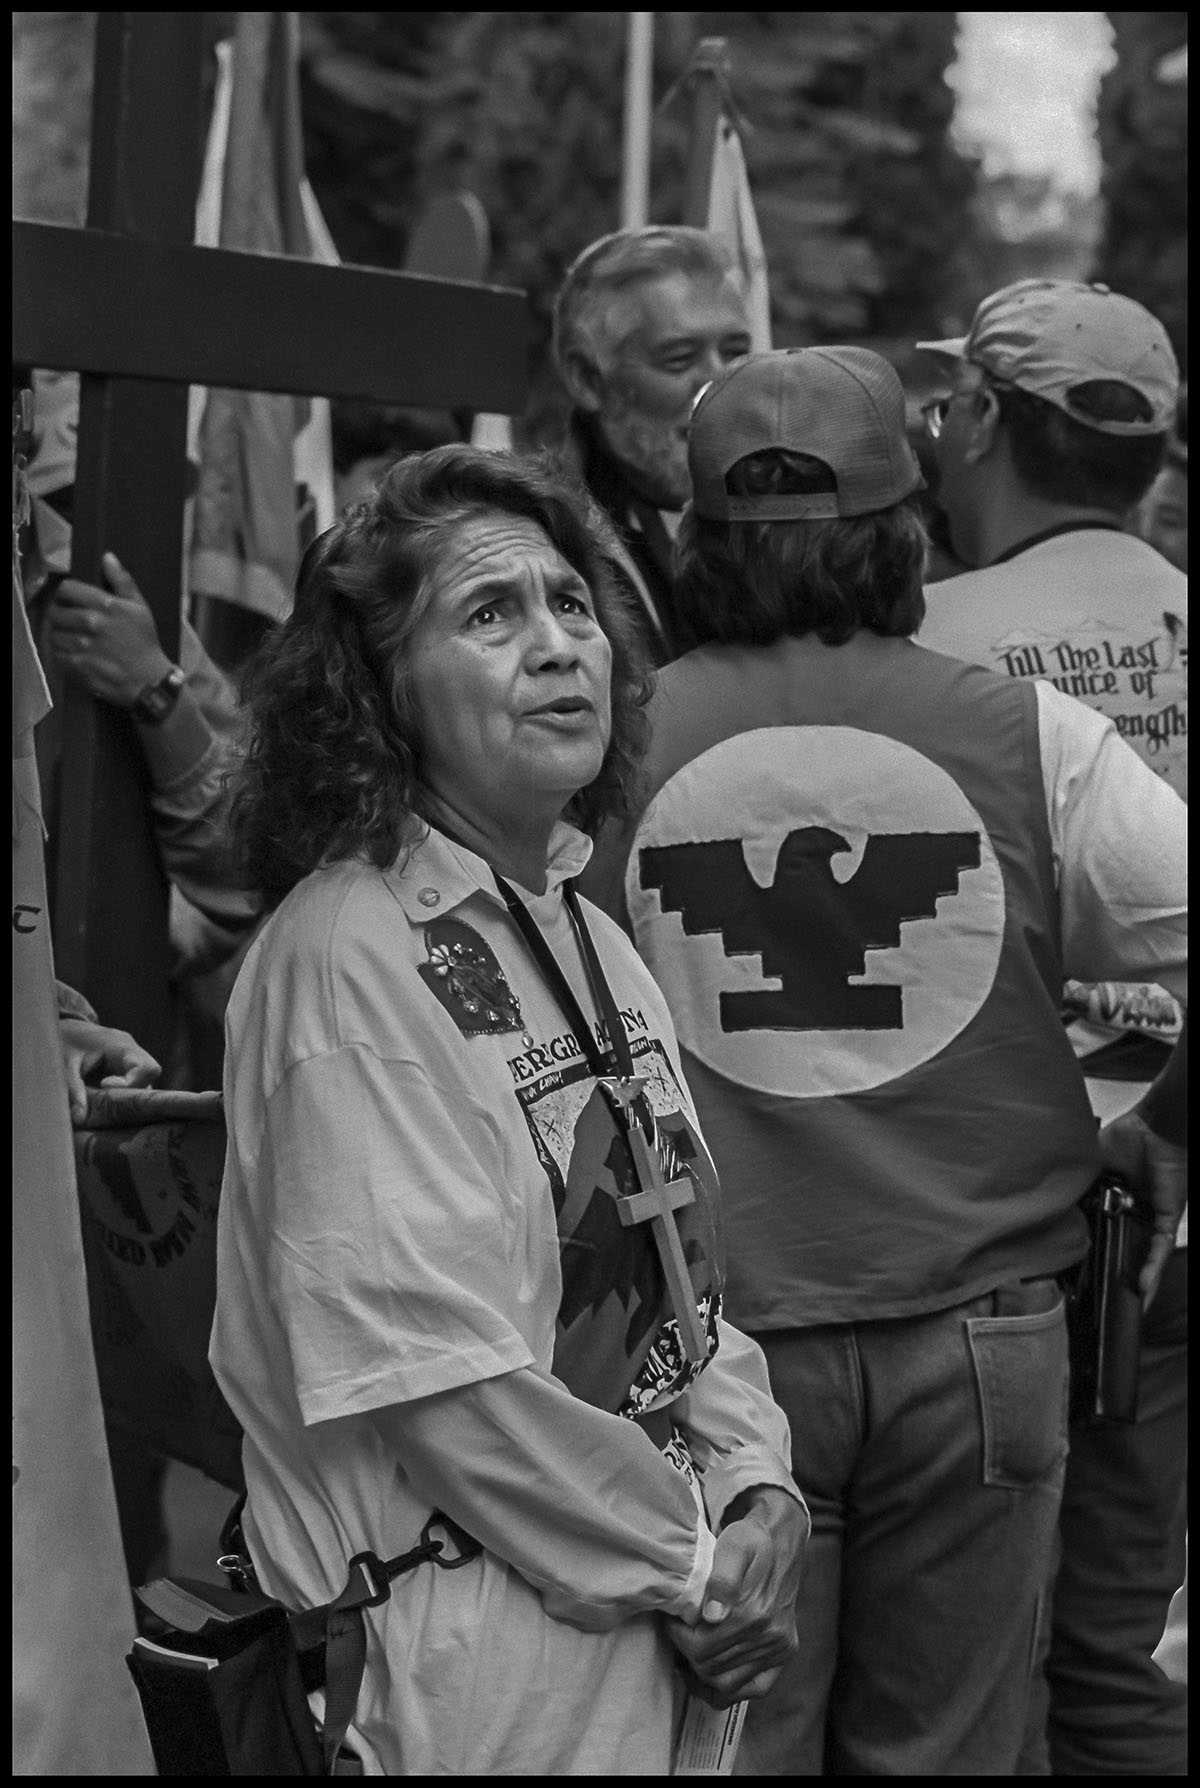 A tired Dolores Huerta in Sacramento, as the march reaches its end after a month. 1994. The David Bacon Archive, Department of Special Collections, Stanford Libraries.